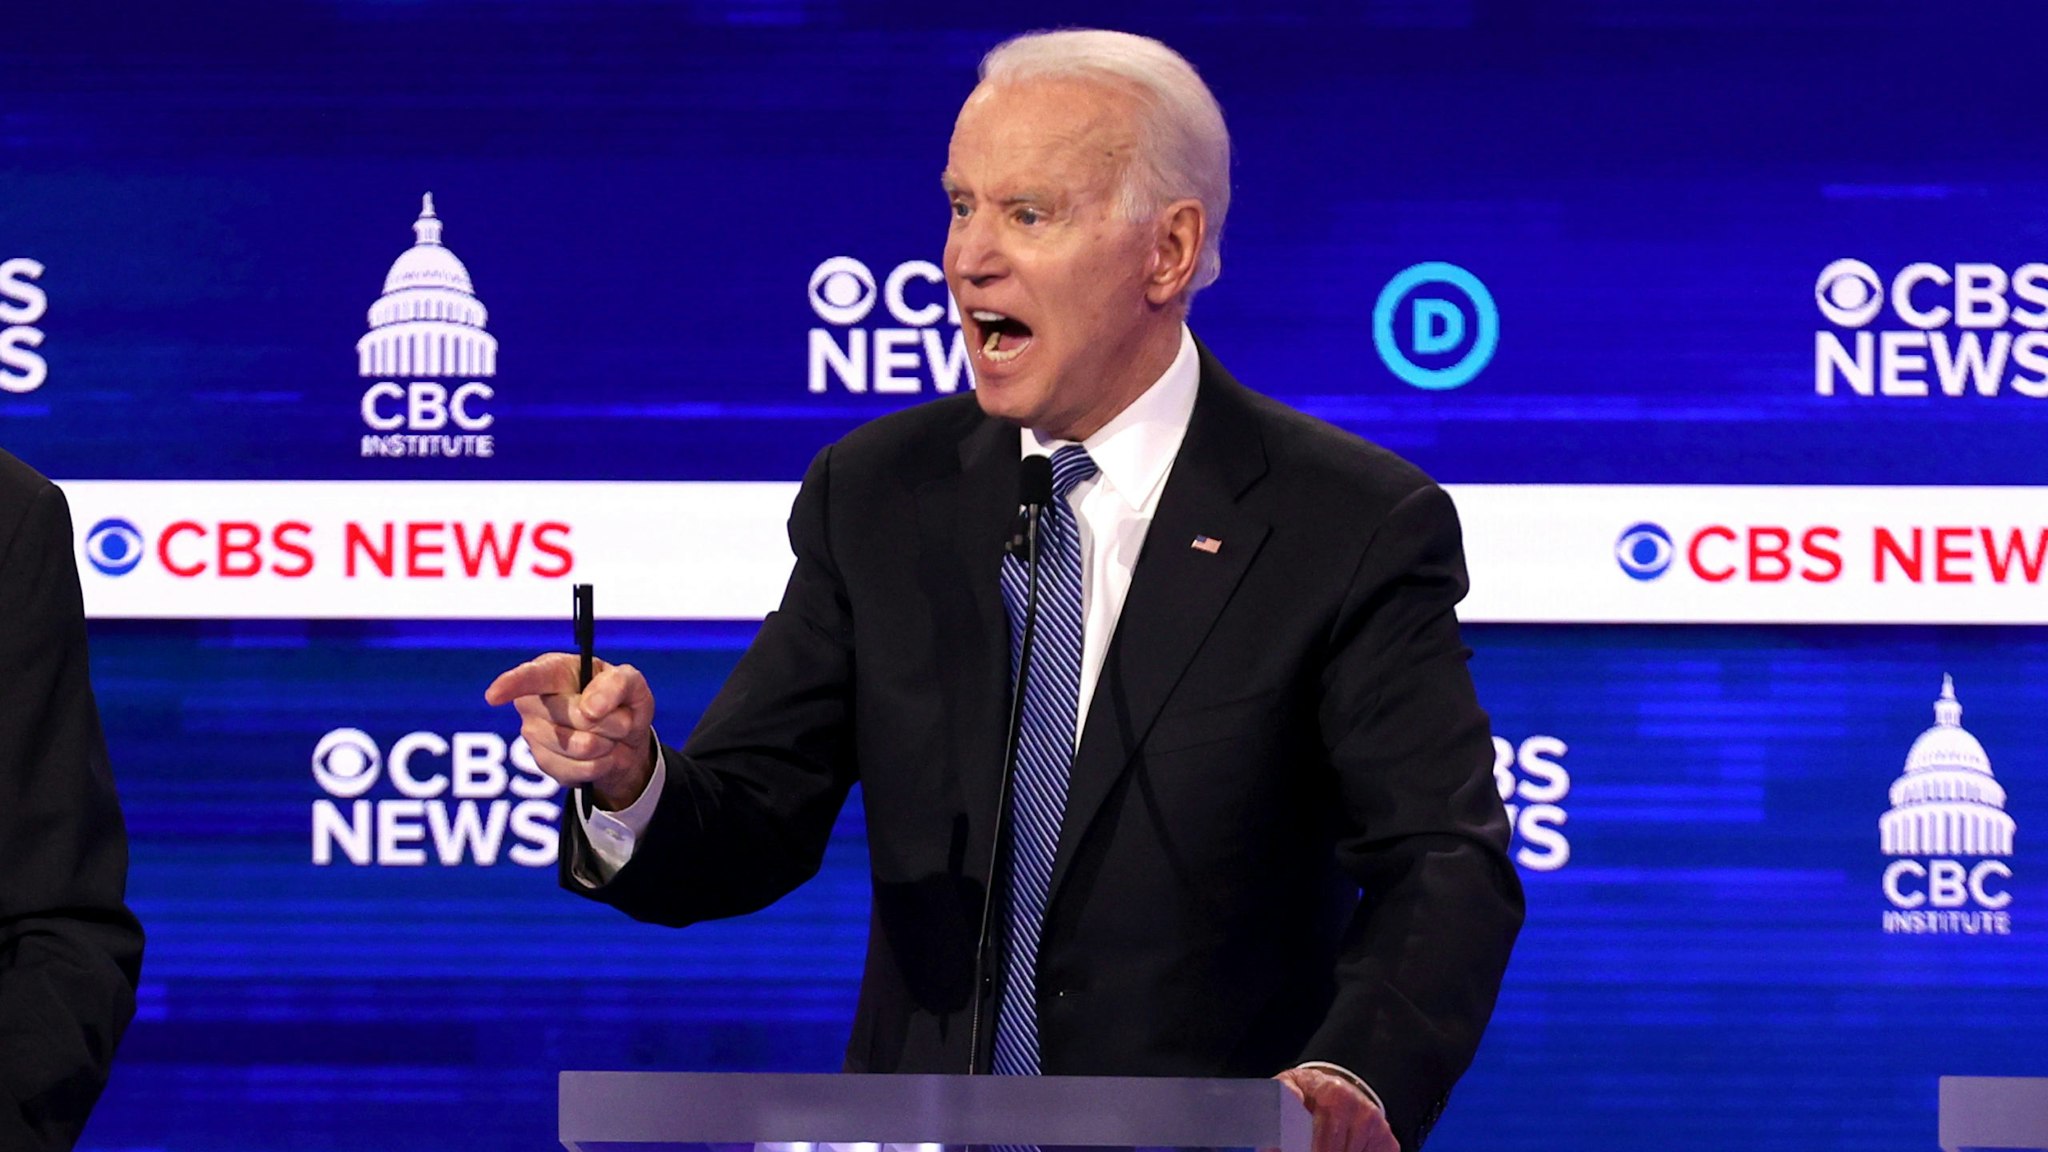 CHARLESTON, SOUTH CAROLINA - FEBRUARY 25: Democratic presidential candidate former Vice President Joe Biden speaks during the Democratic presidential primary debate at the Charleston Gaillard Center on February 25, 2020 in Charleston, South Carolina. Seven candidates qualified for the debate, hosted by CBS News and Congressional Black Caucus Institute, ahead of South Carolina’s primary in four days.